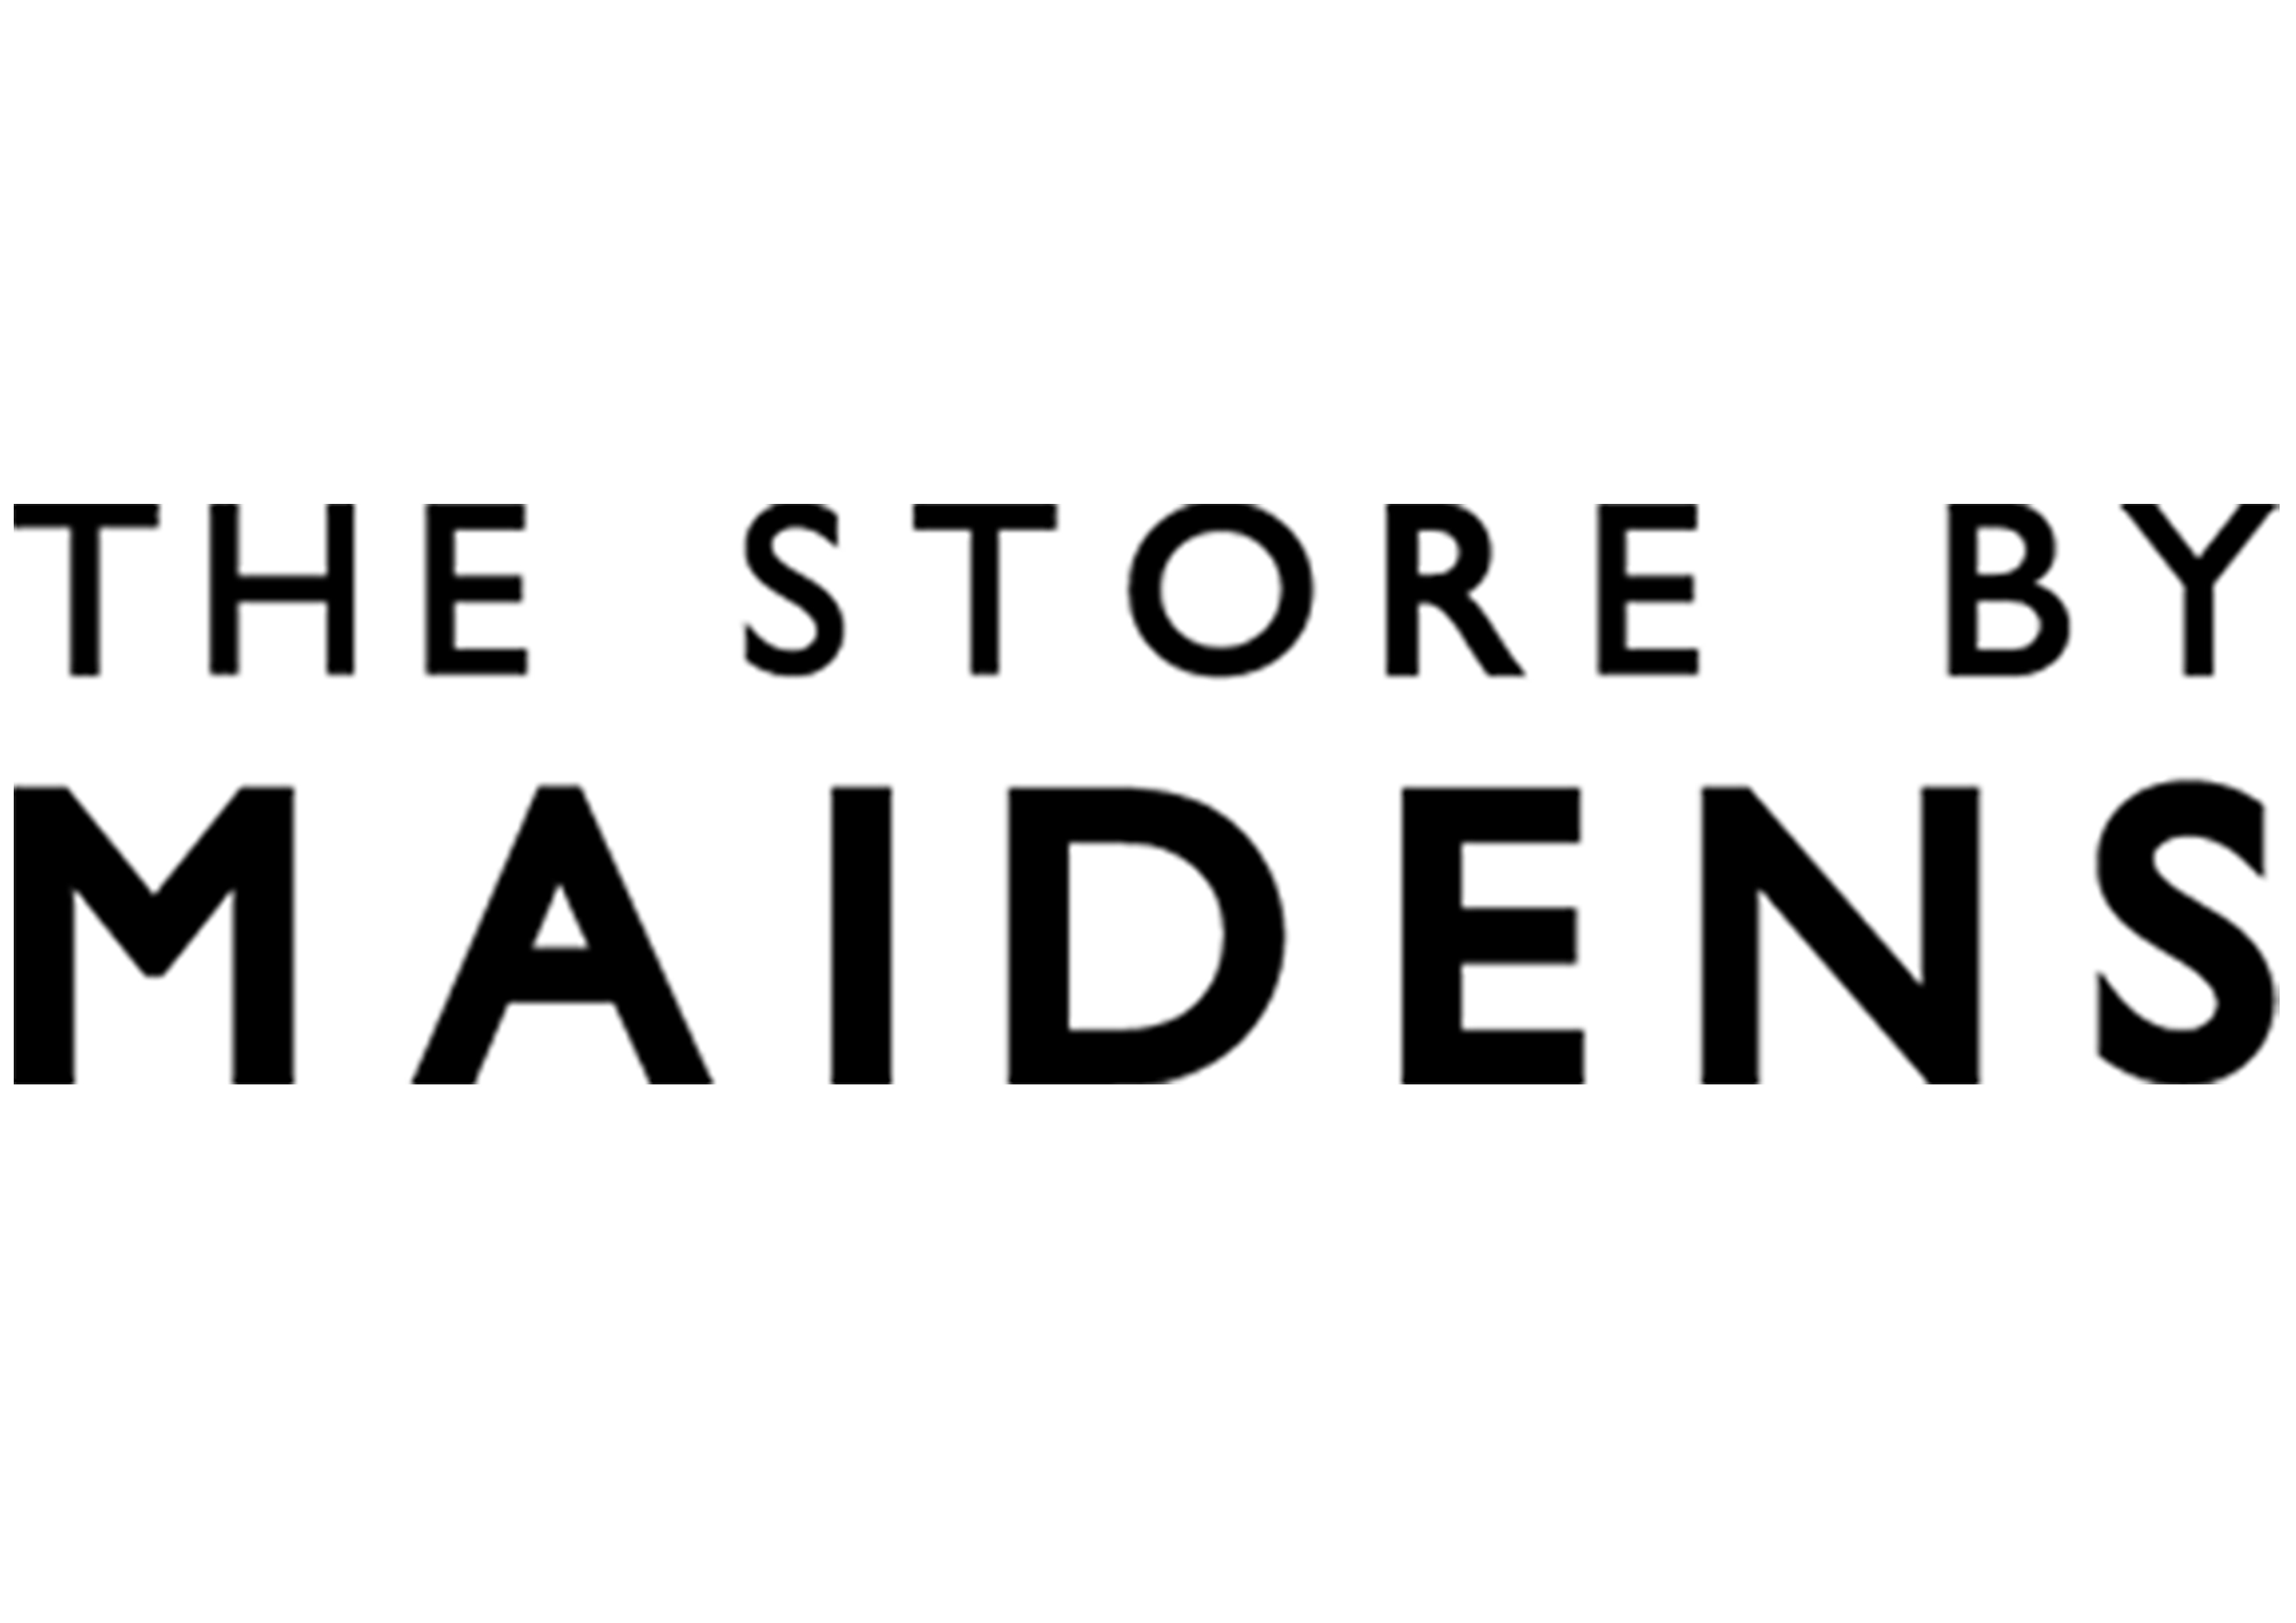 THE STORE by MAIDENS